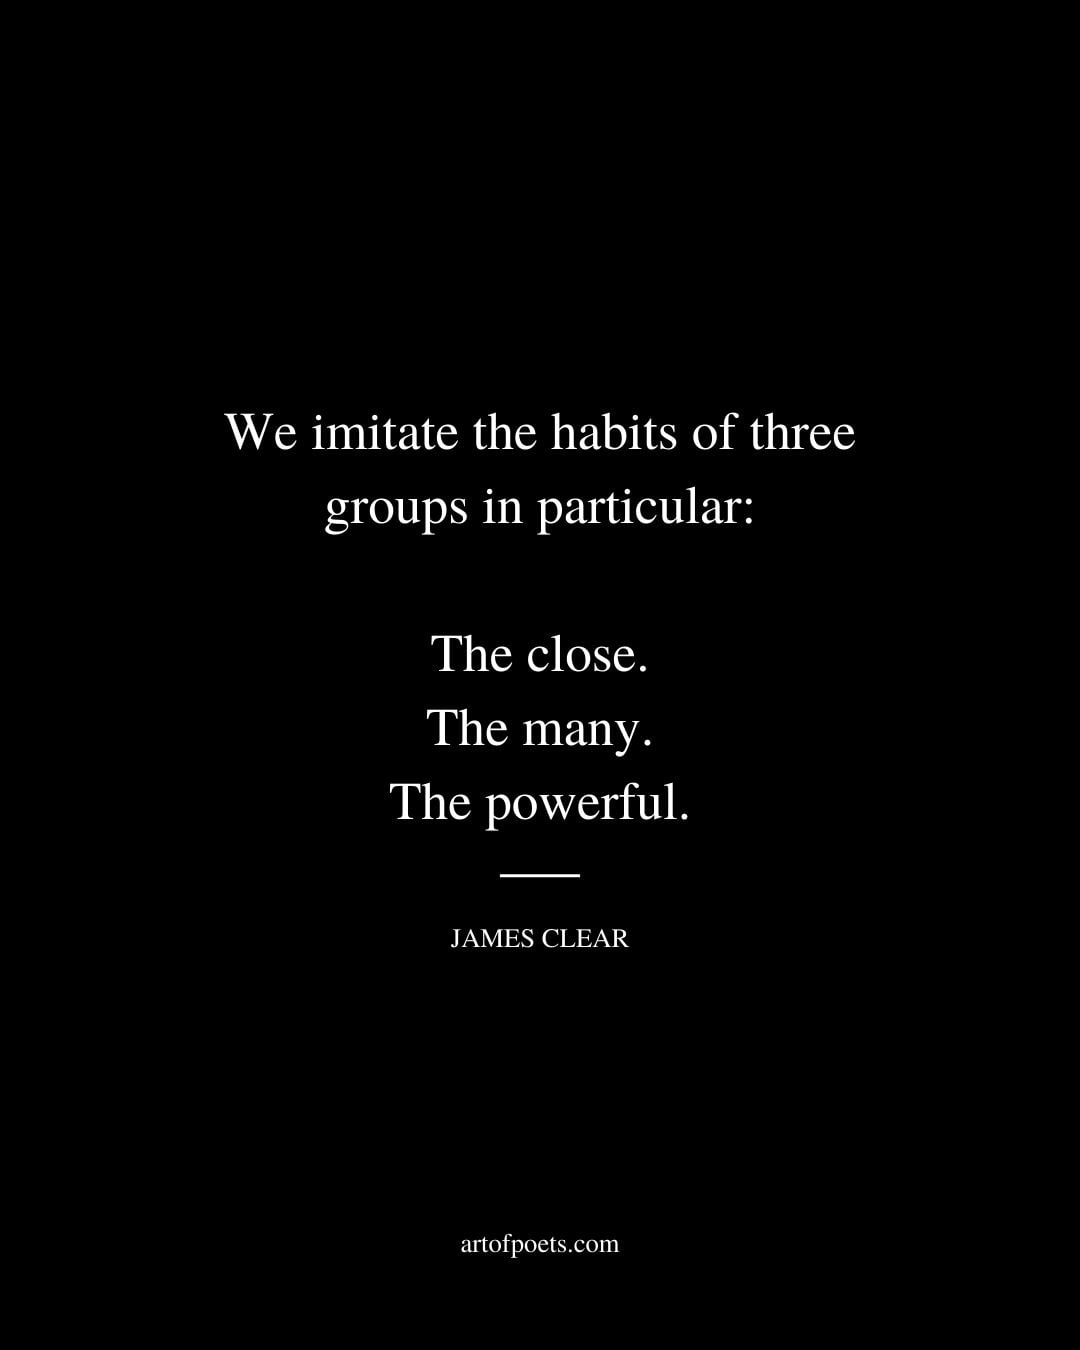 We imitate the habits of three groups in particular The close. The many. The powerful